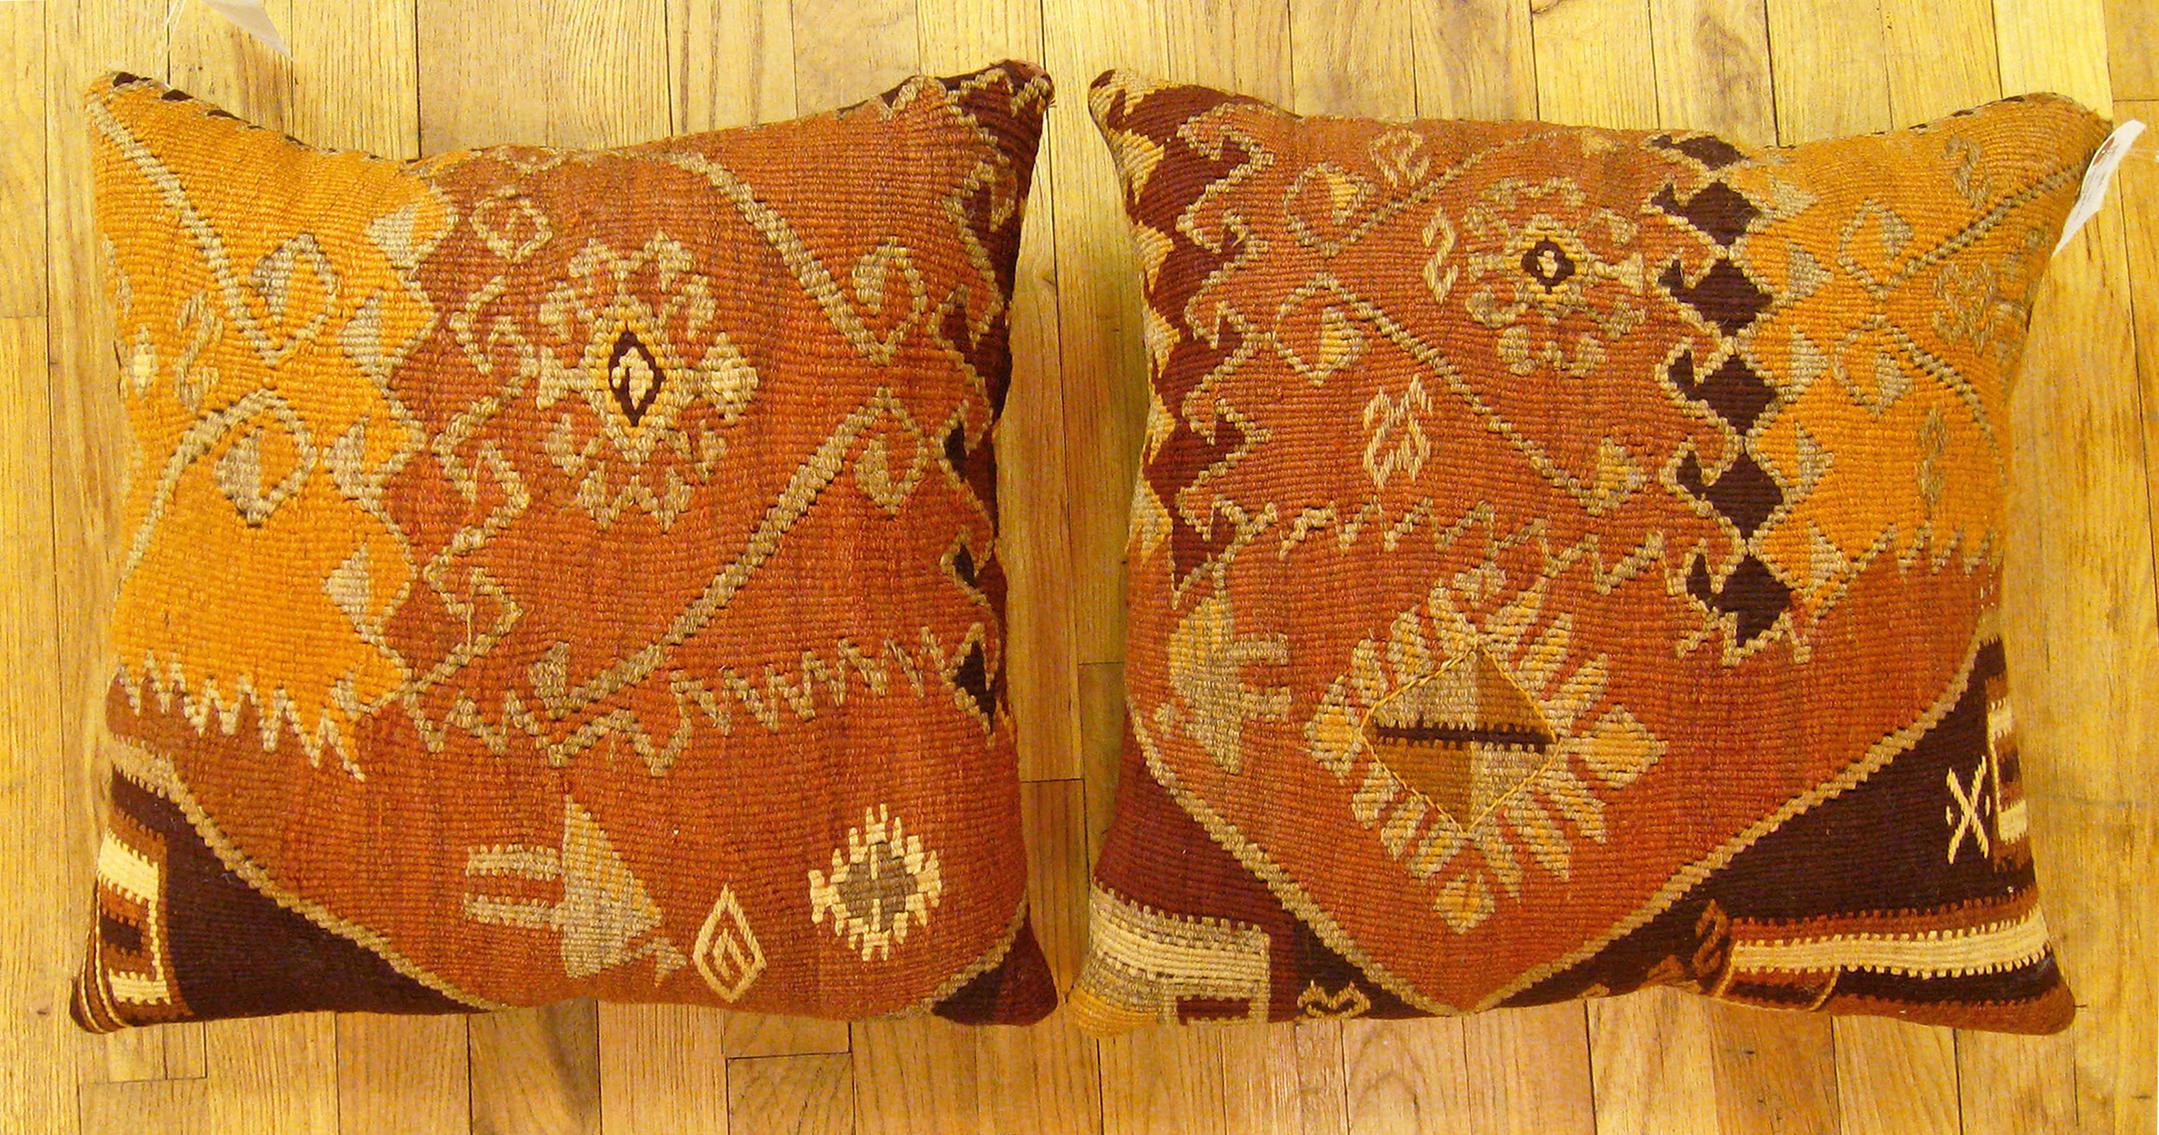 A Pair of Vintage Turkish Kilim rug pillows; size 17” X 17” Each.

A vintage decorative pillows with geometric abstracts allover a brown central field, size 17” X 17” each. This lovely decorative pillow features a vintage fabric of a KIilim carpet